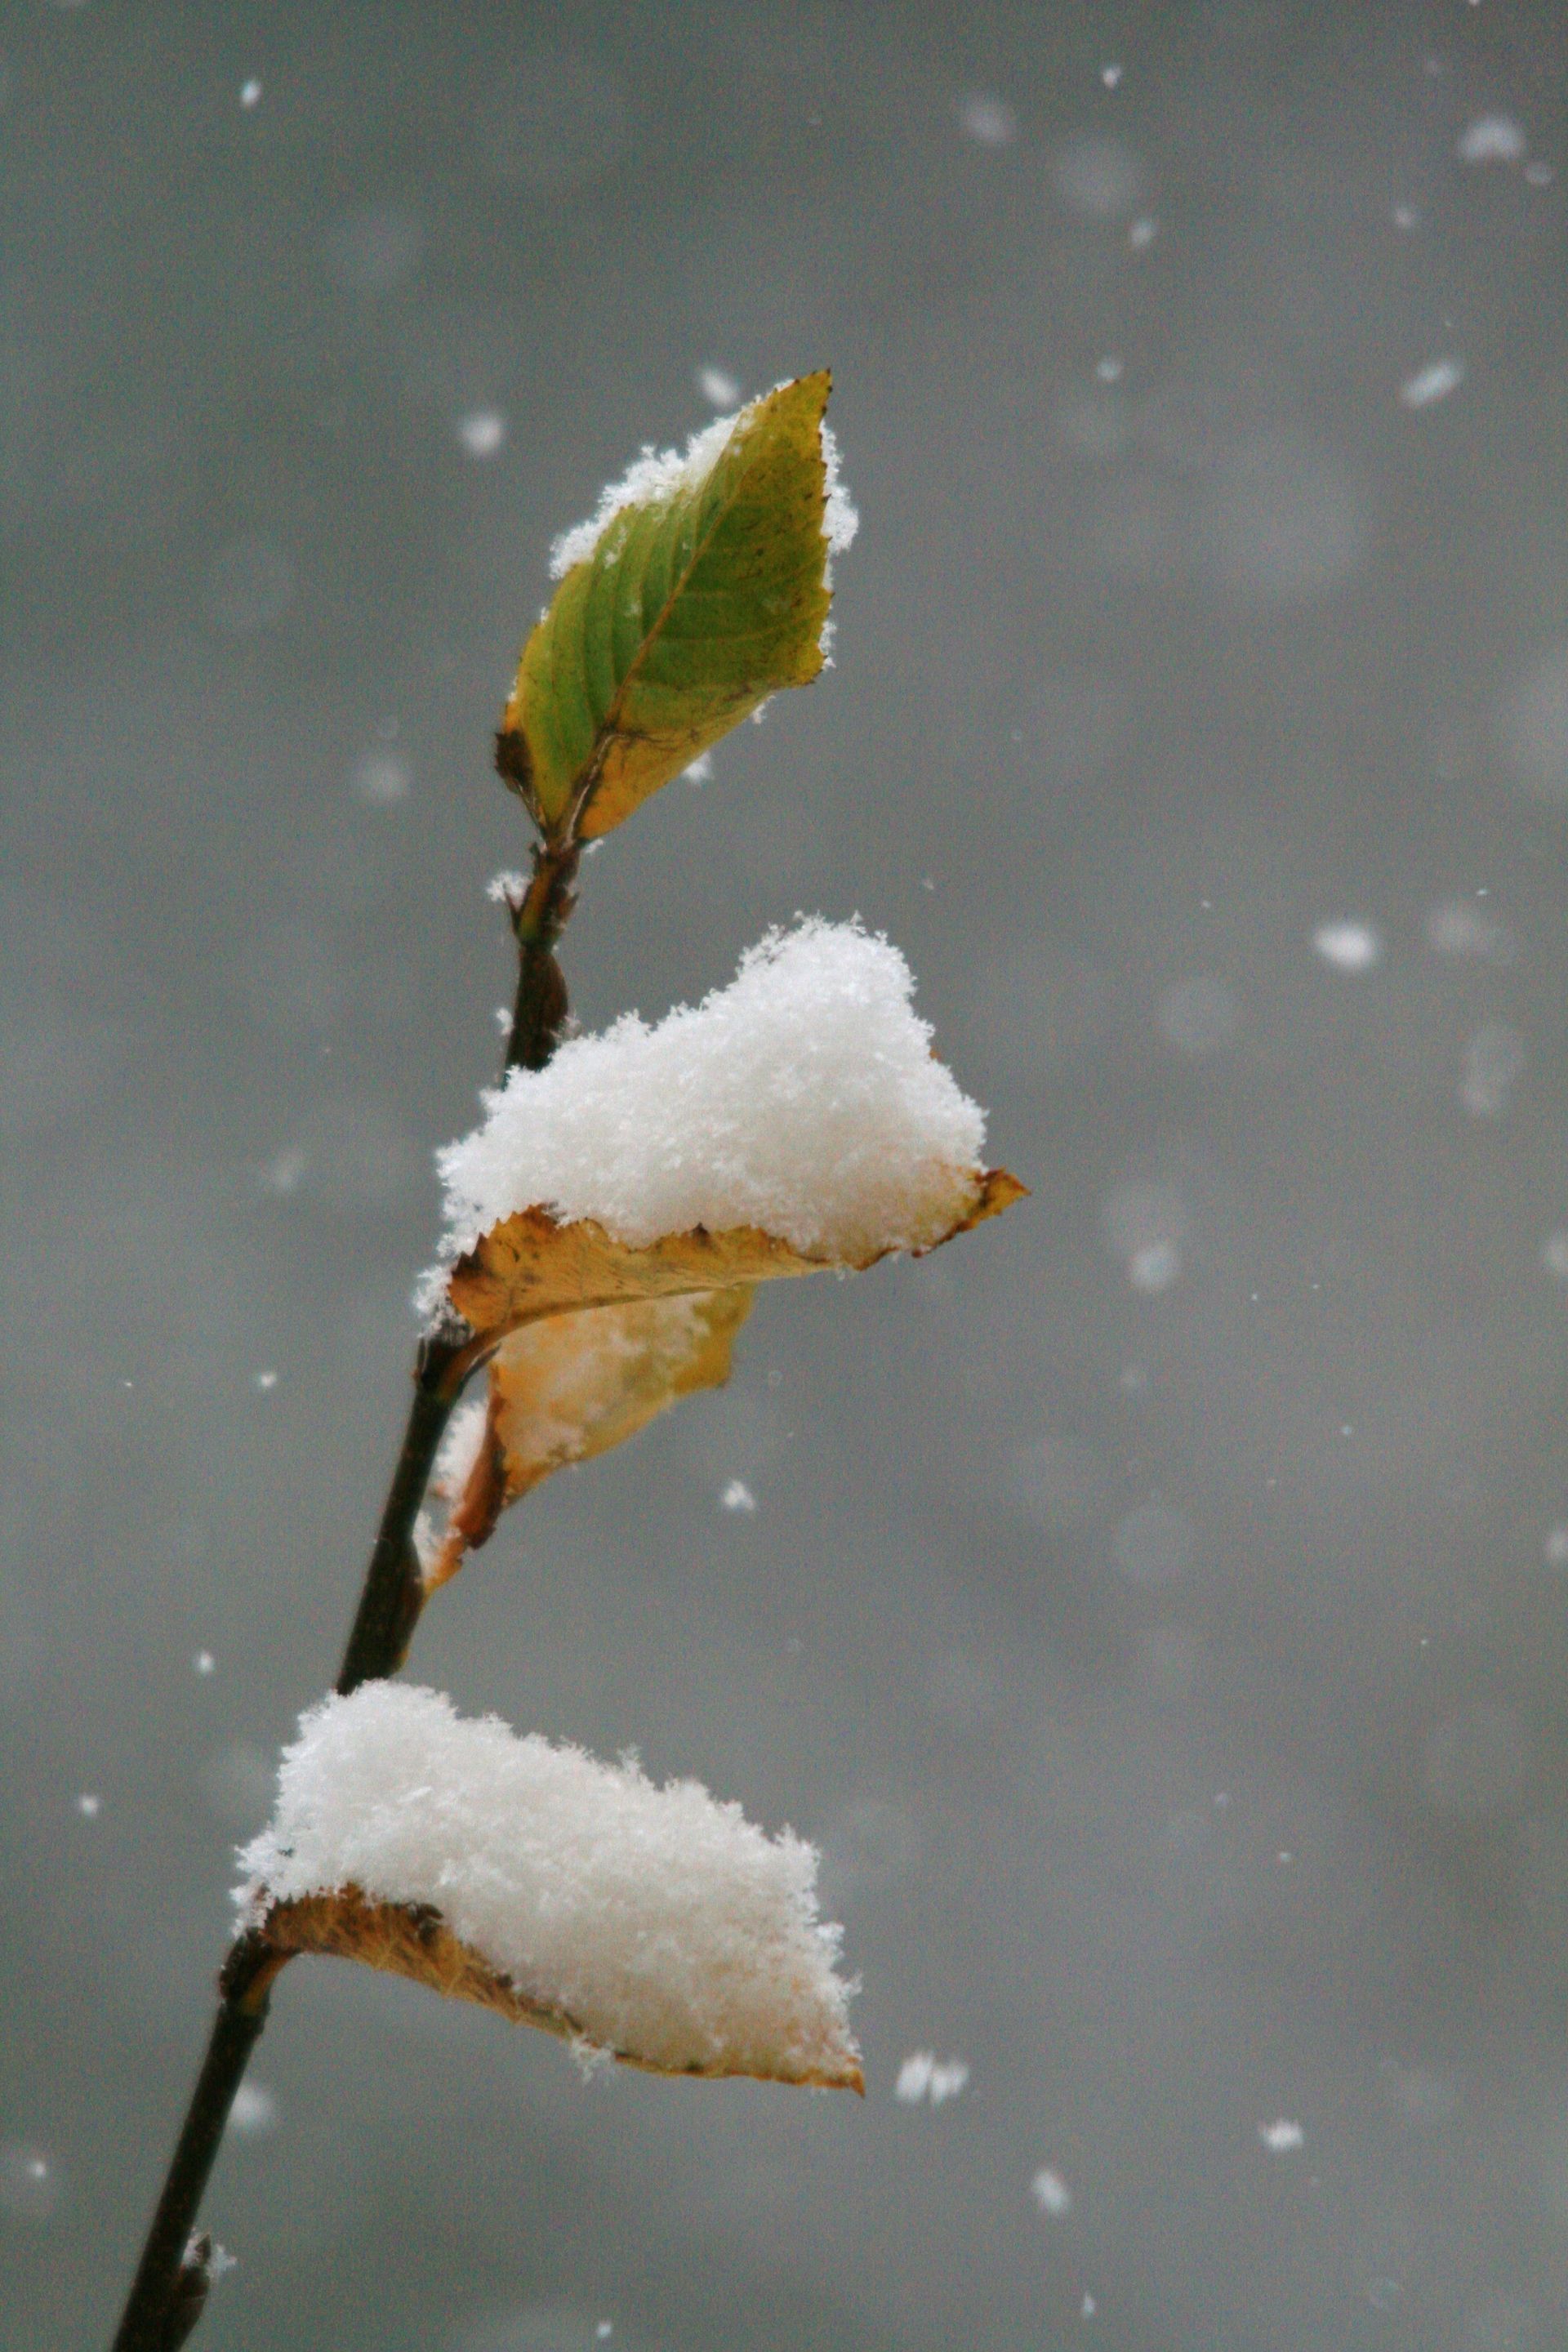 Snow lands on the leaves of a tree.